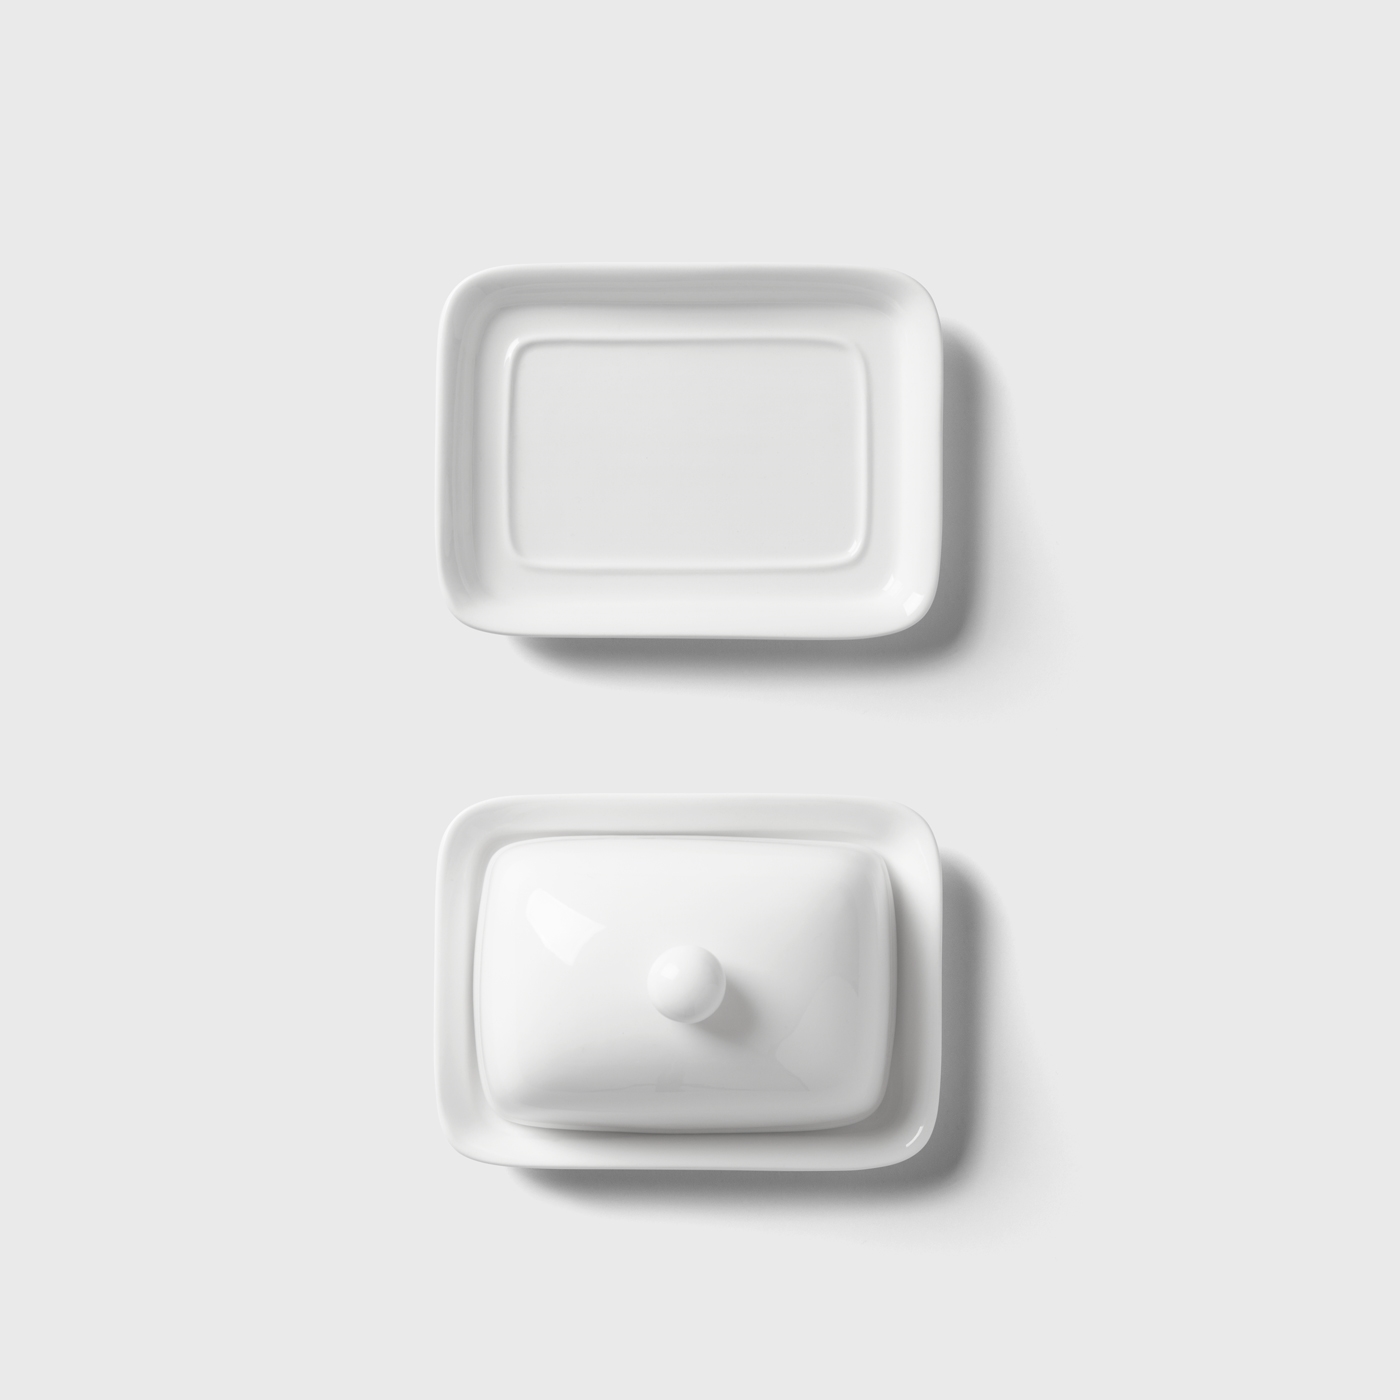 Top View of Butter Dish Mockup FREE PSD